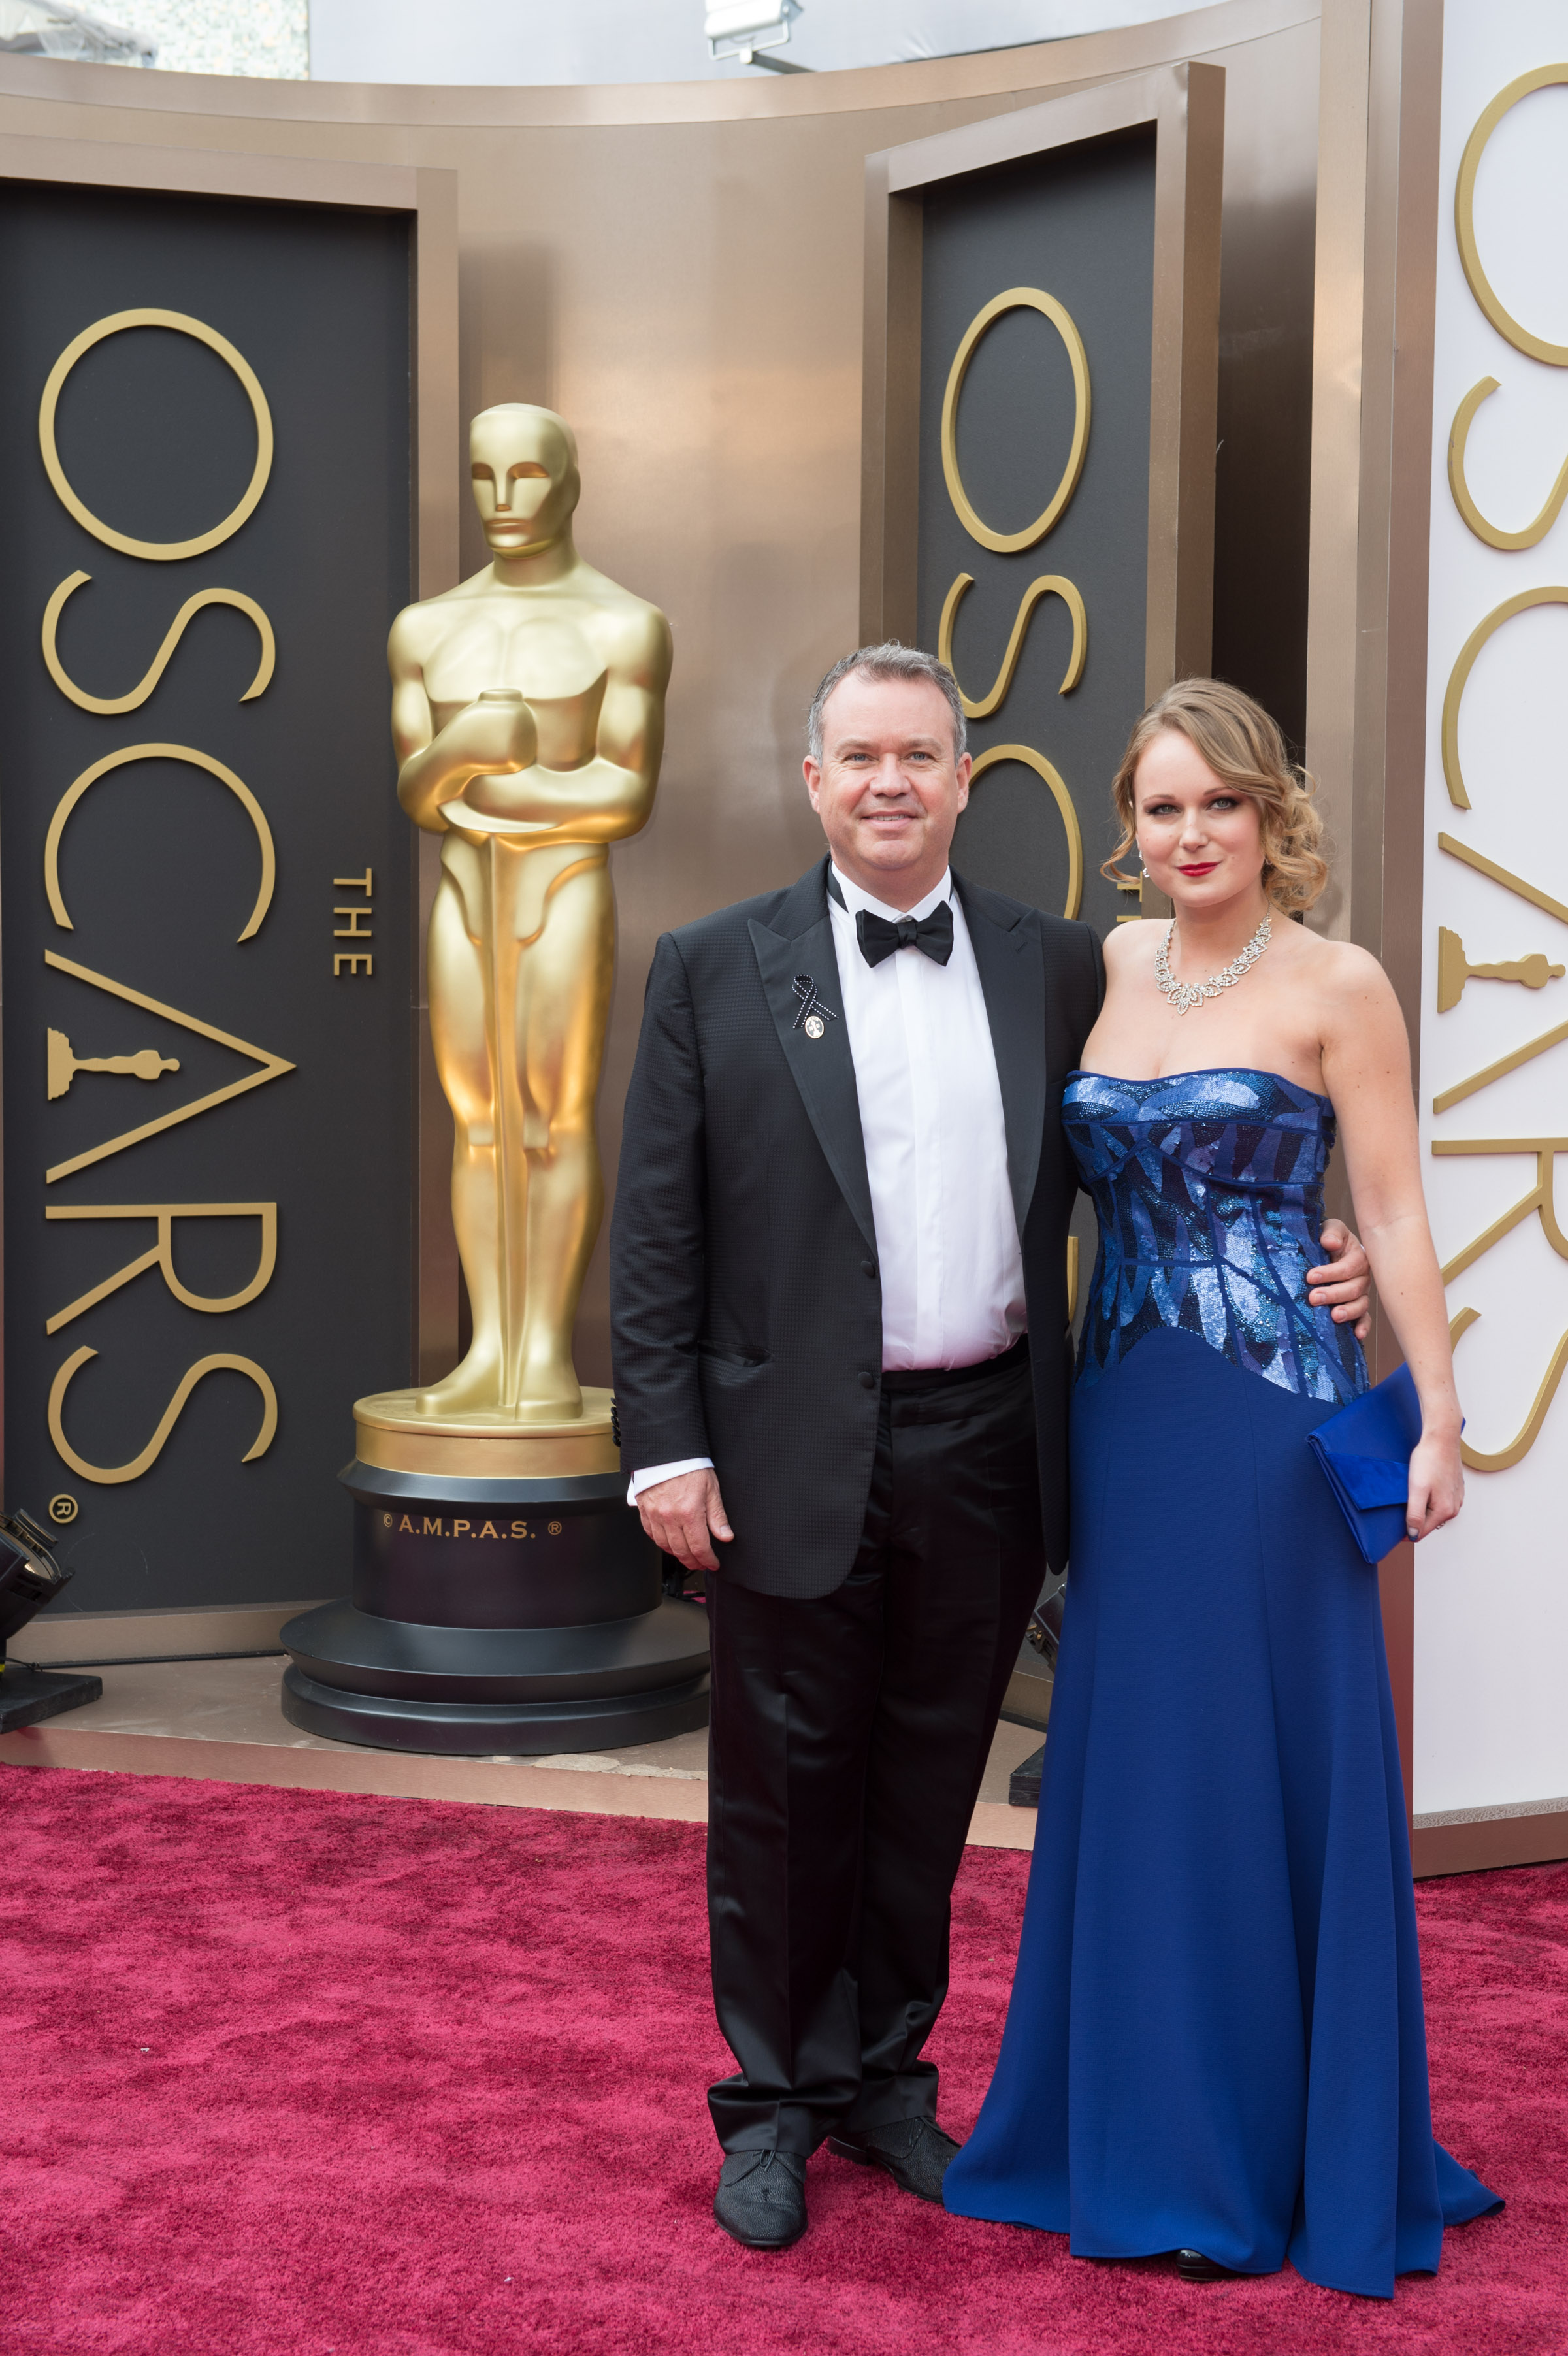 Neil Corbould and Maria Pudlowska attend the Oscars at Hollywood & Highland Center on March 2, 2014 in Hollywood, California.